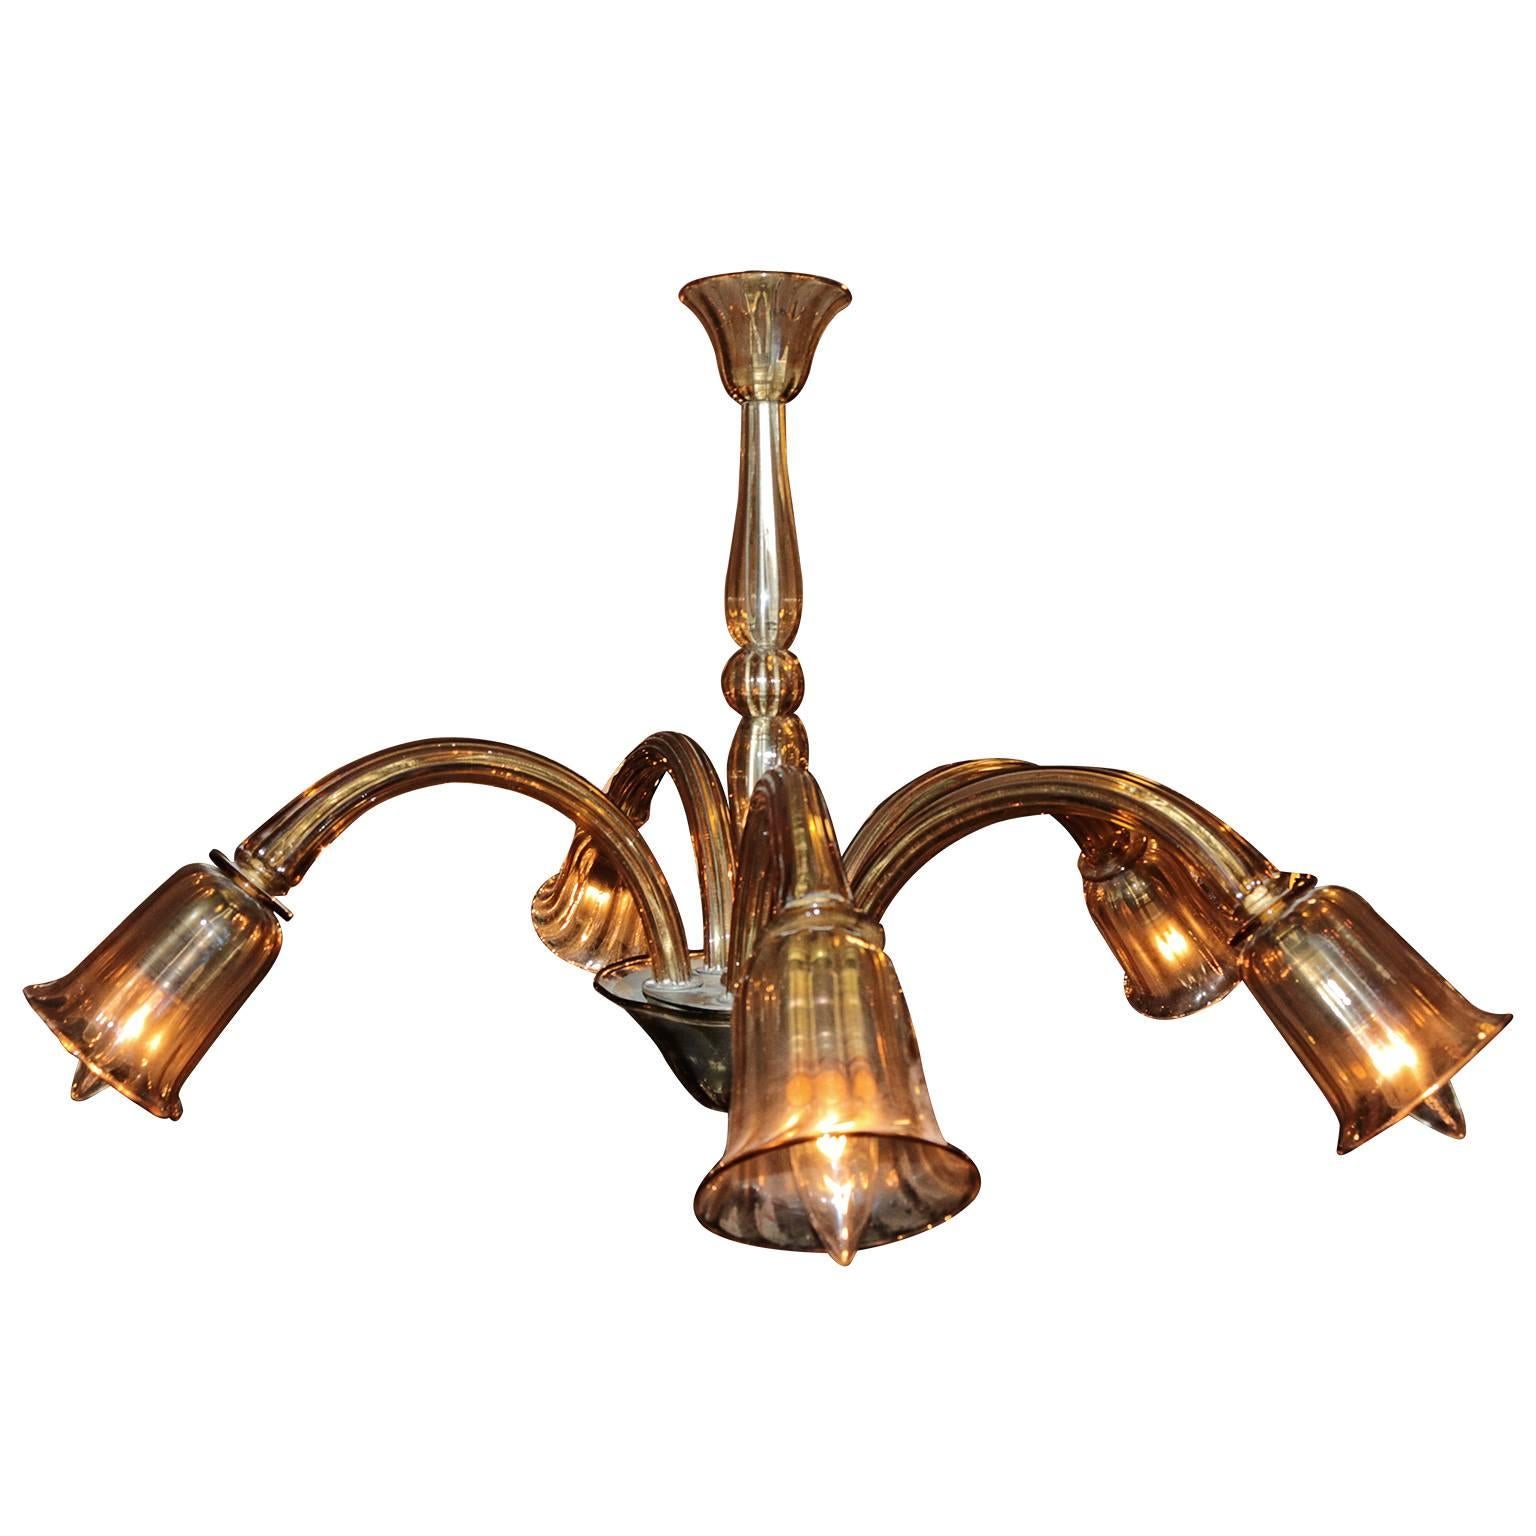 This beautiful five-arm handblown Venetian Murano with single tier chandelier in a transparent champagne color is in excellent working used condition. The arms are down right and are adjustable and may swivel to adjust for lighting. Comes with chain